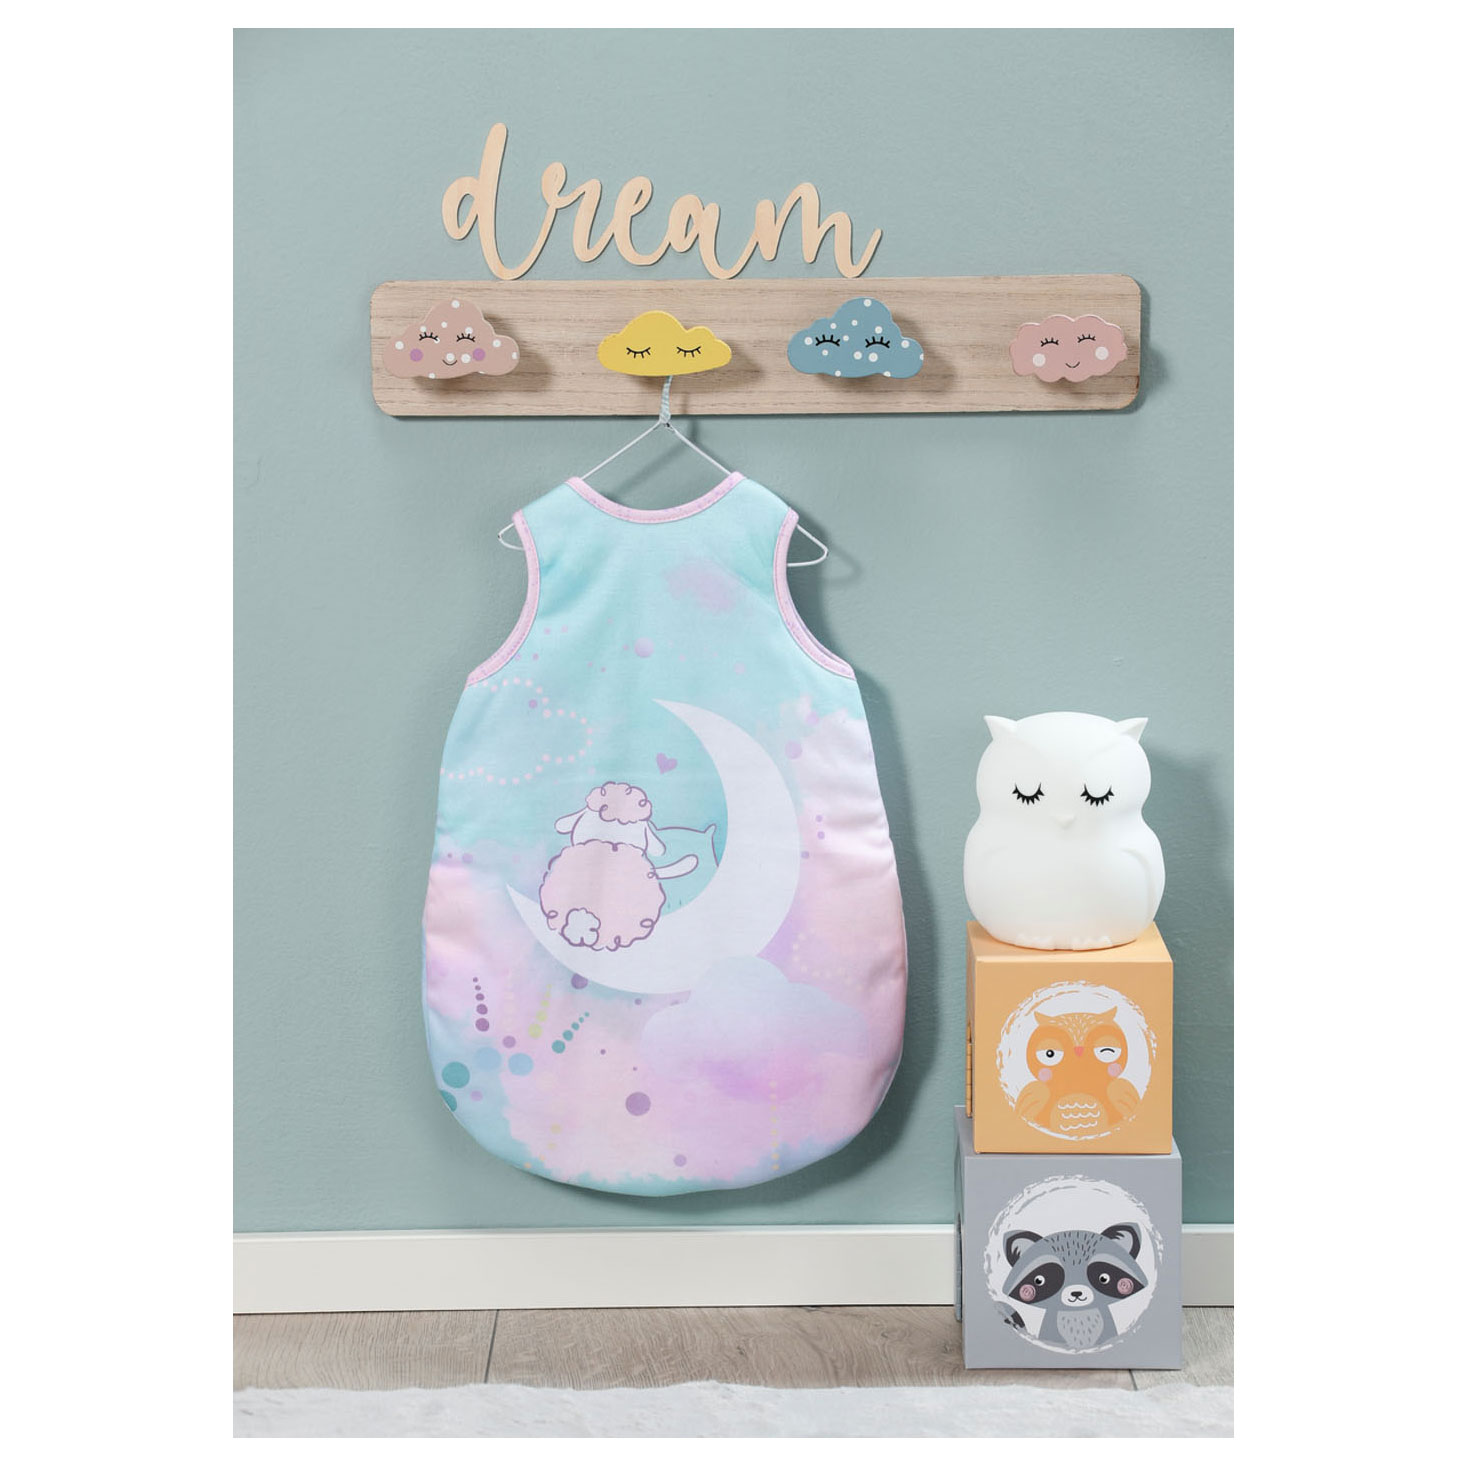 Baby Annabell Sweets Dreams Schlafsack